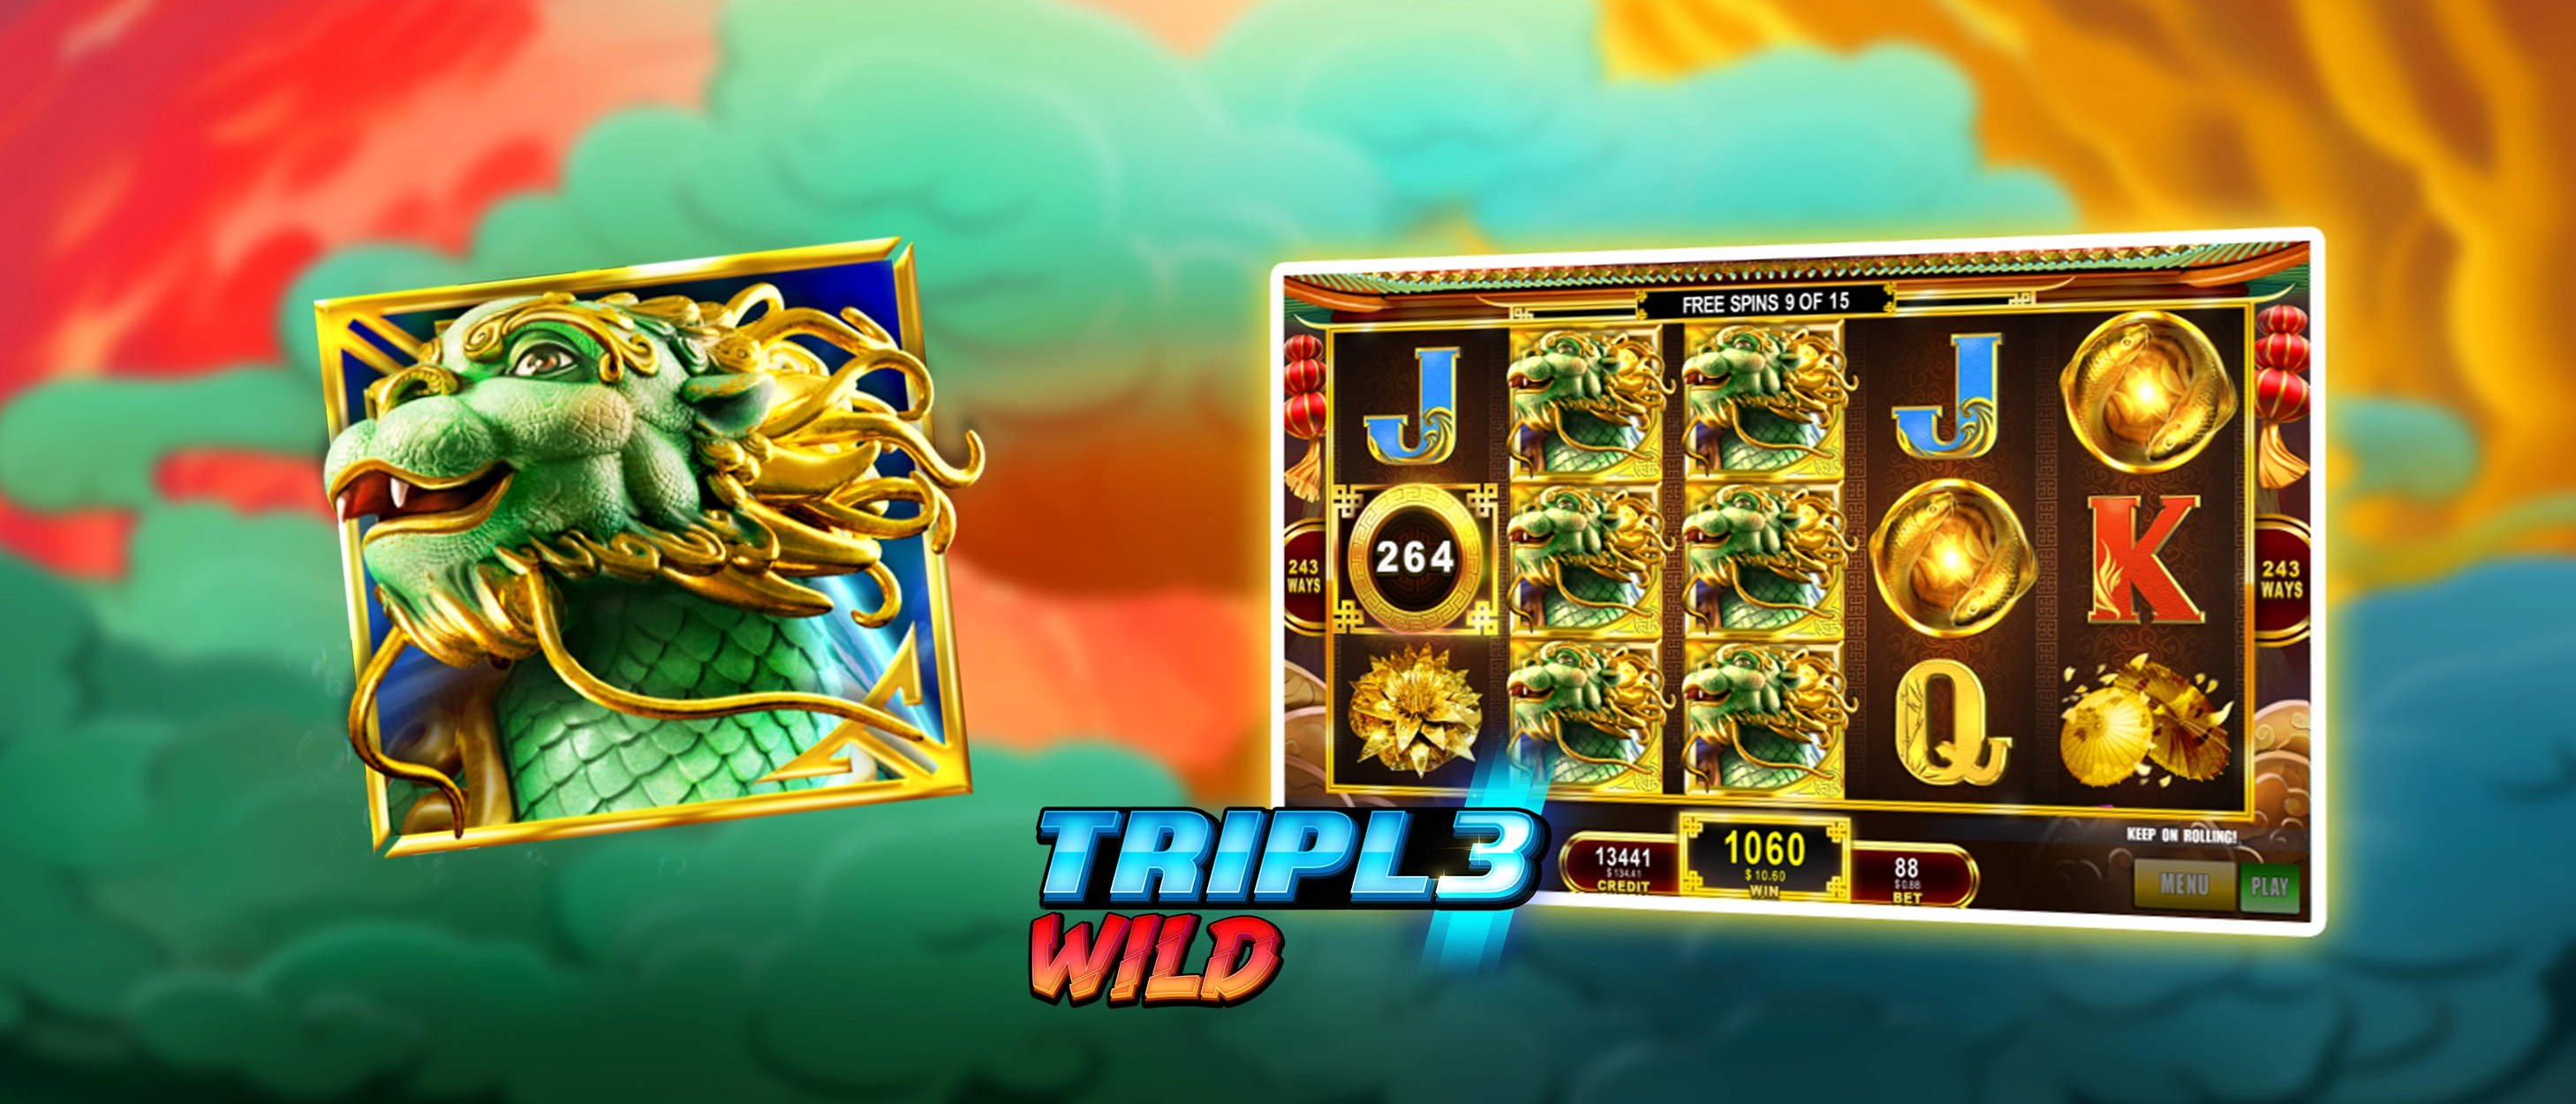 This image has the turtle symbol of the Lucky Gui slots game and a game screen of this slots title with the Triple Wild game feature active simulating a big casino win.